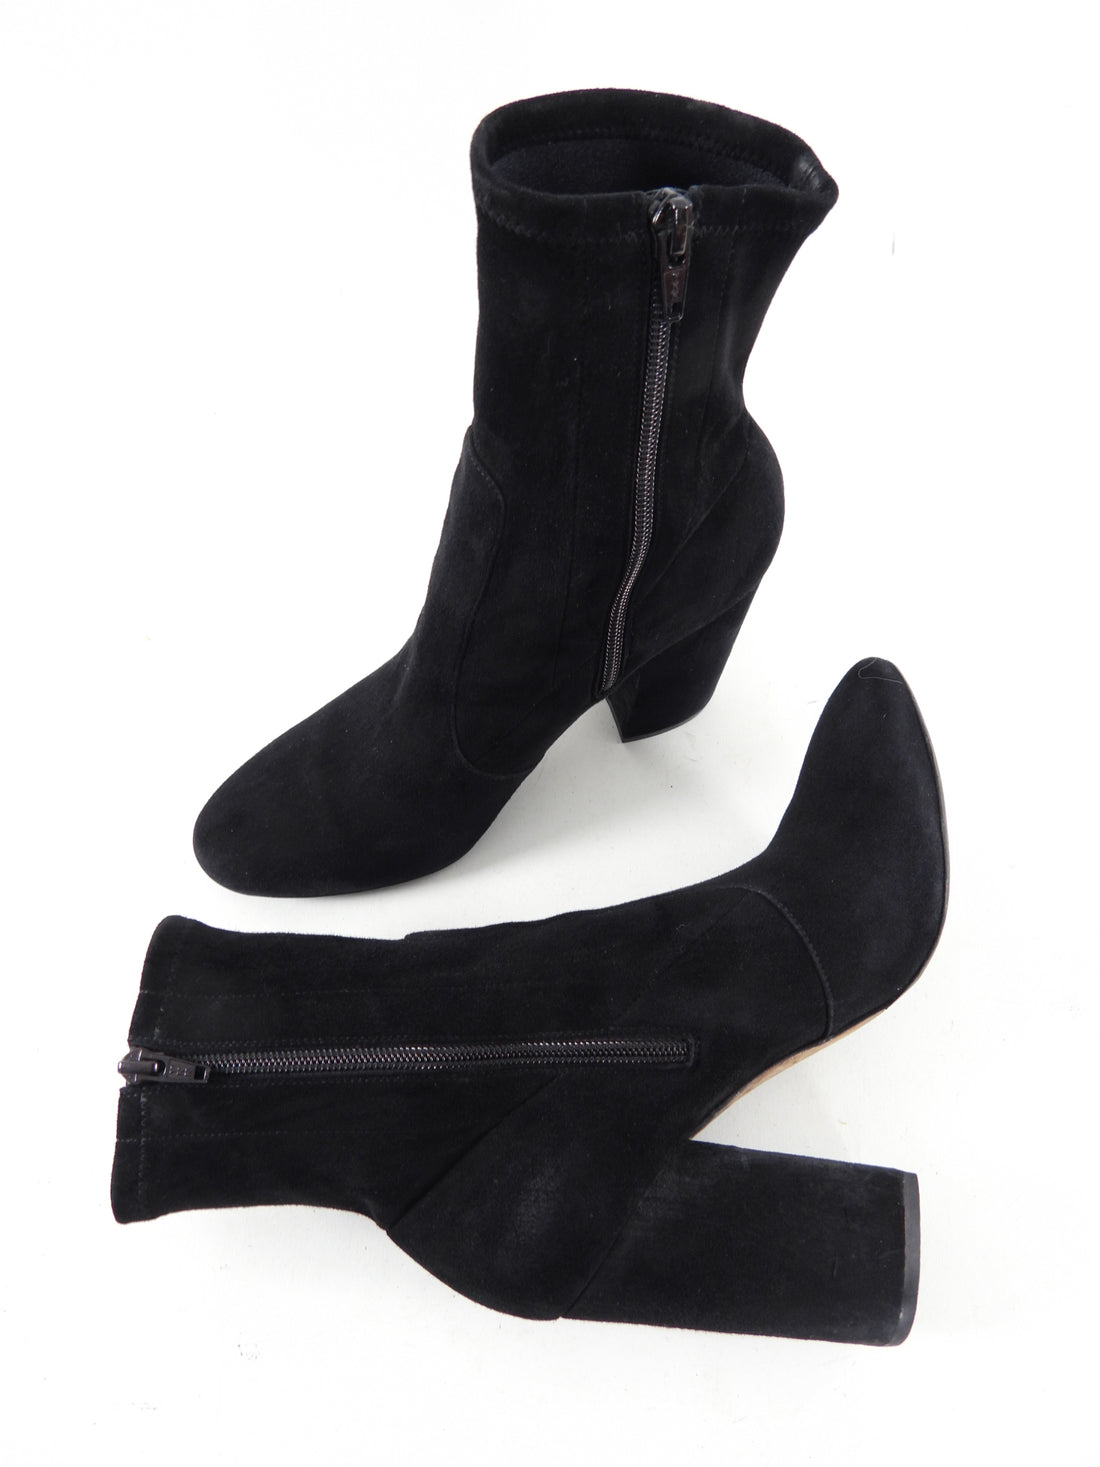 Valentino Black Suede Ankle Boot - 40